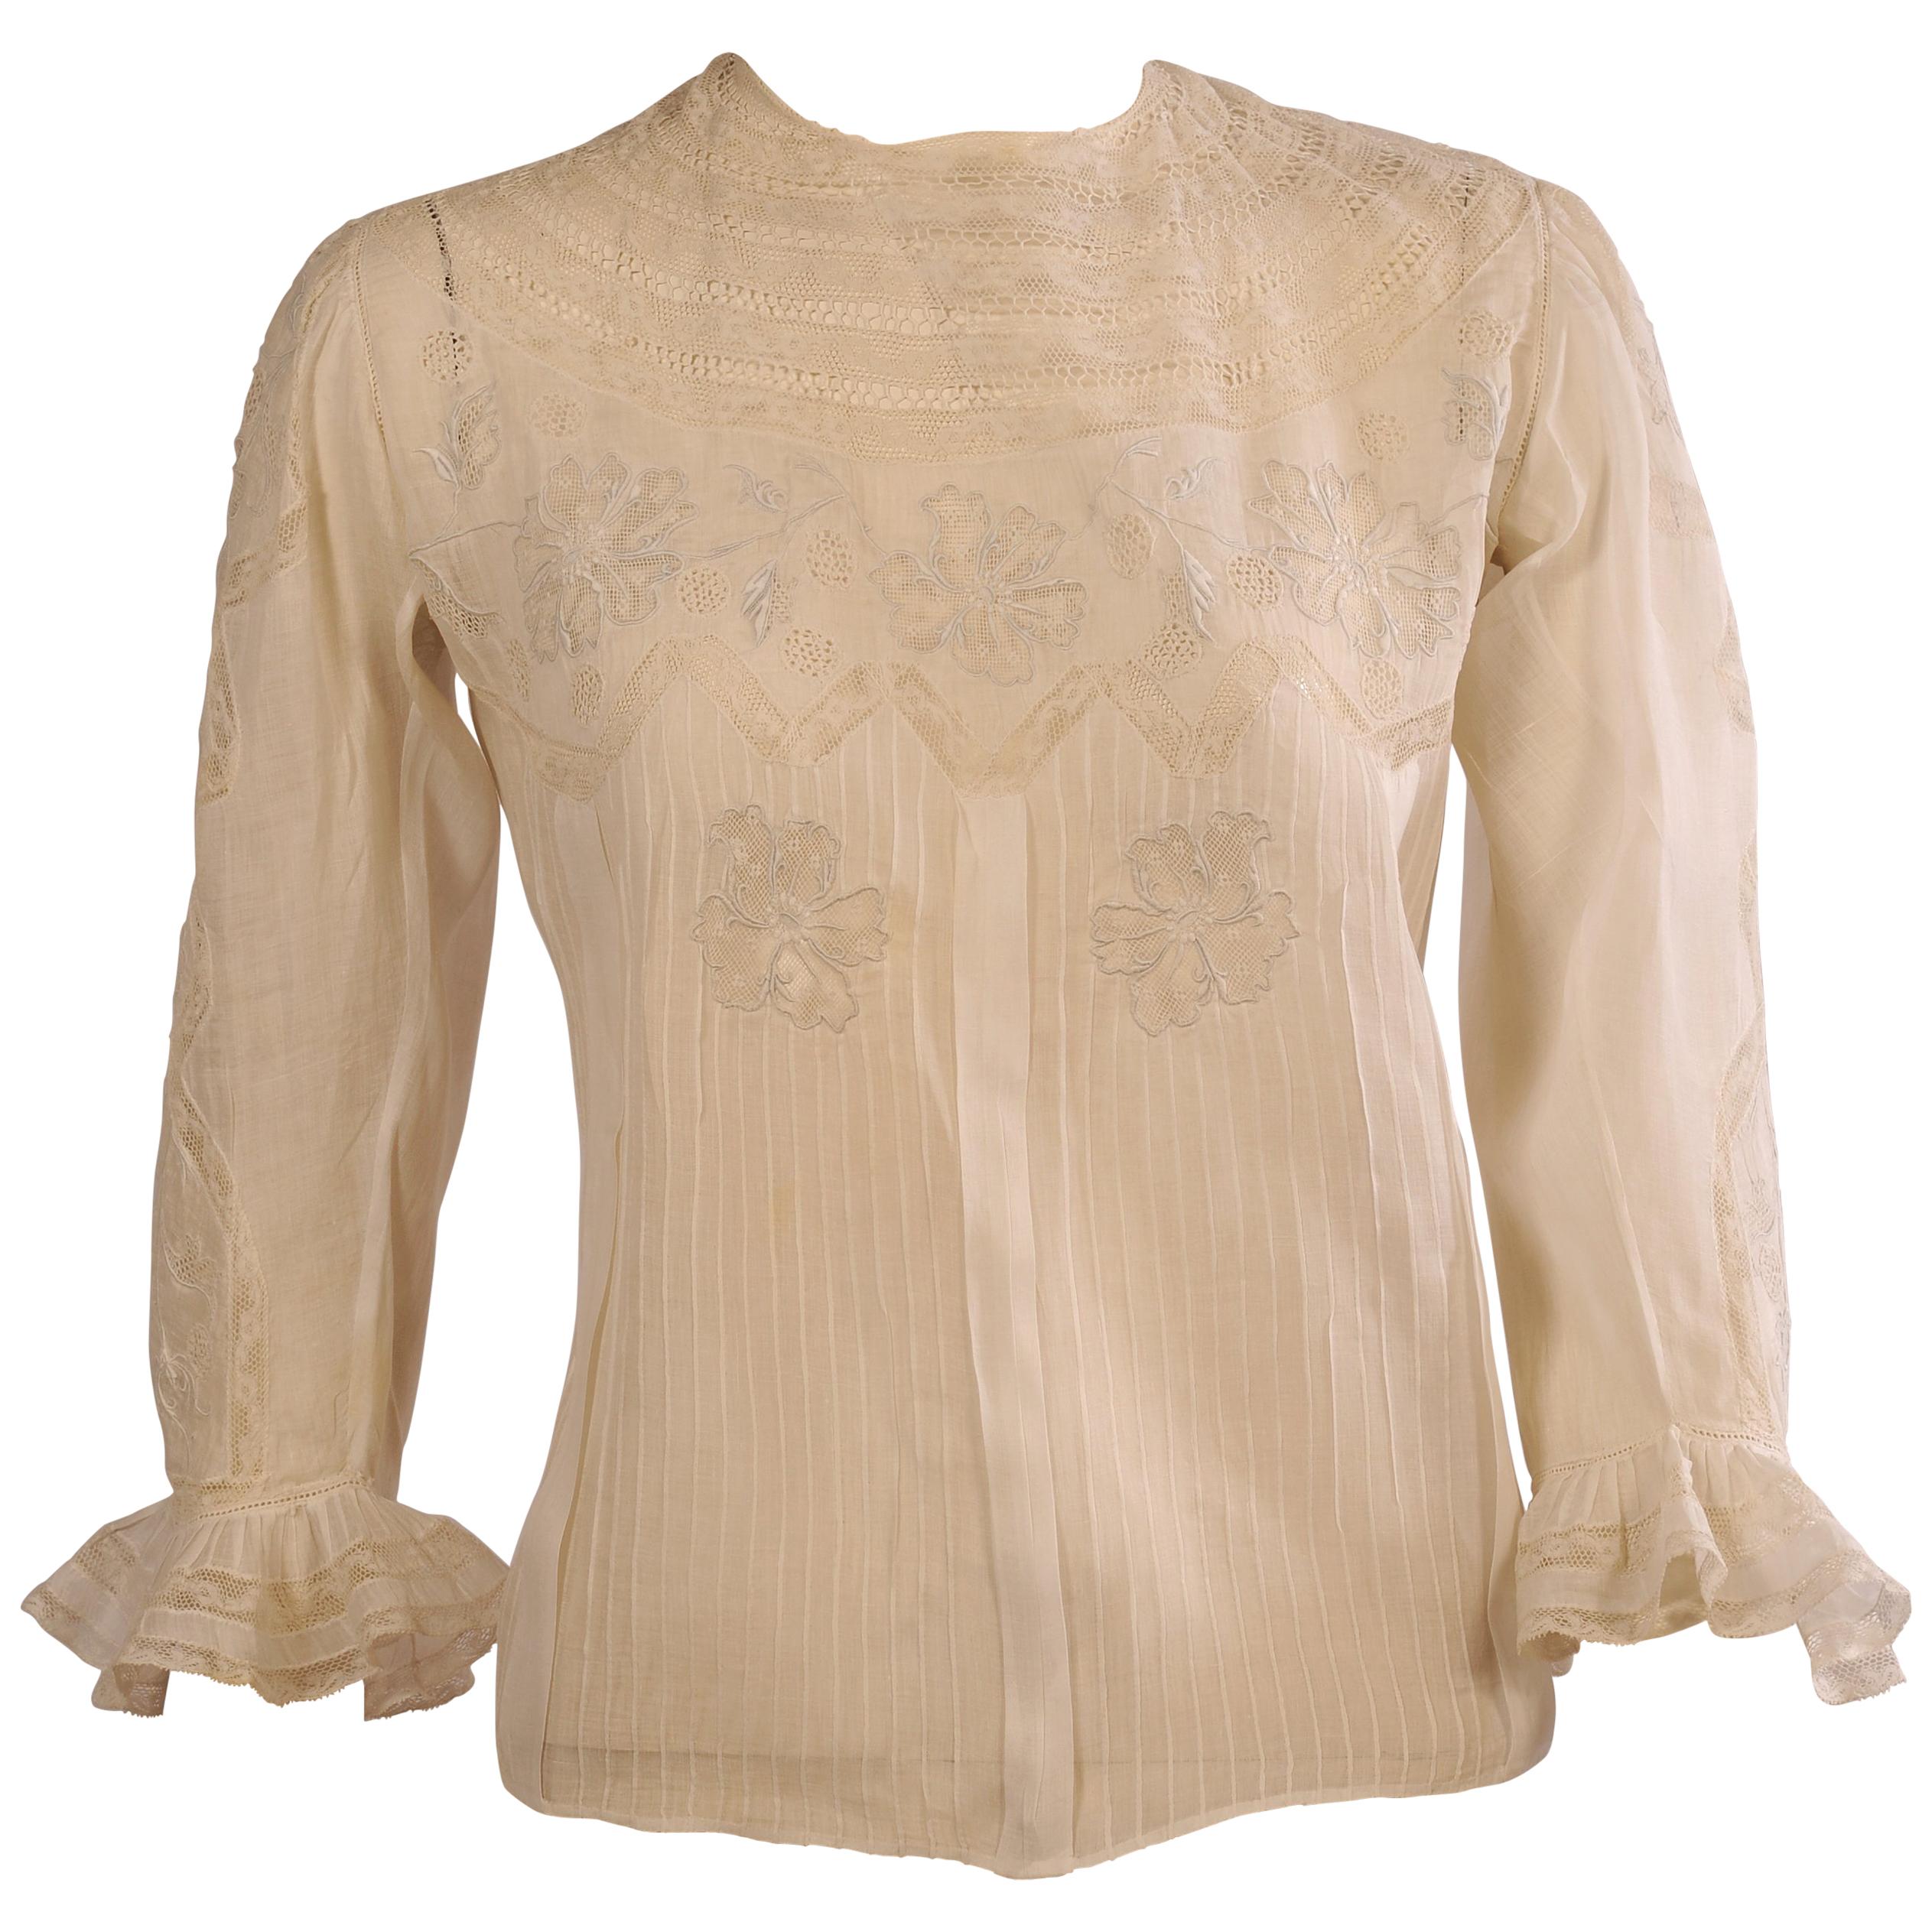 Joseph Enzler Broderie Swiss Handkerchief Linen Blouse with Hand Embroidery For Sale